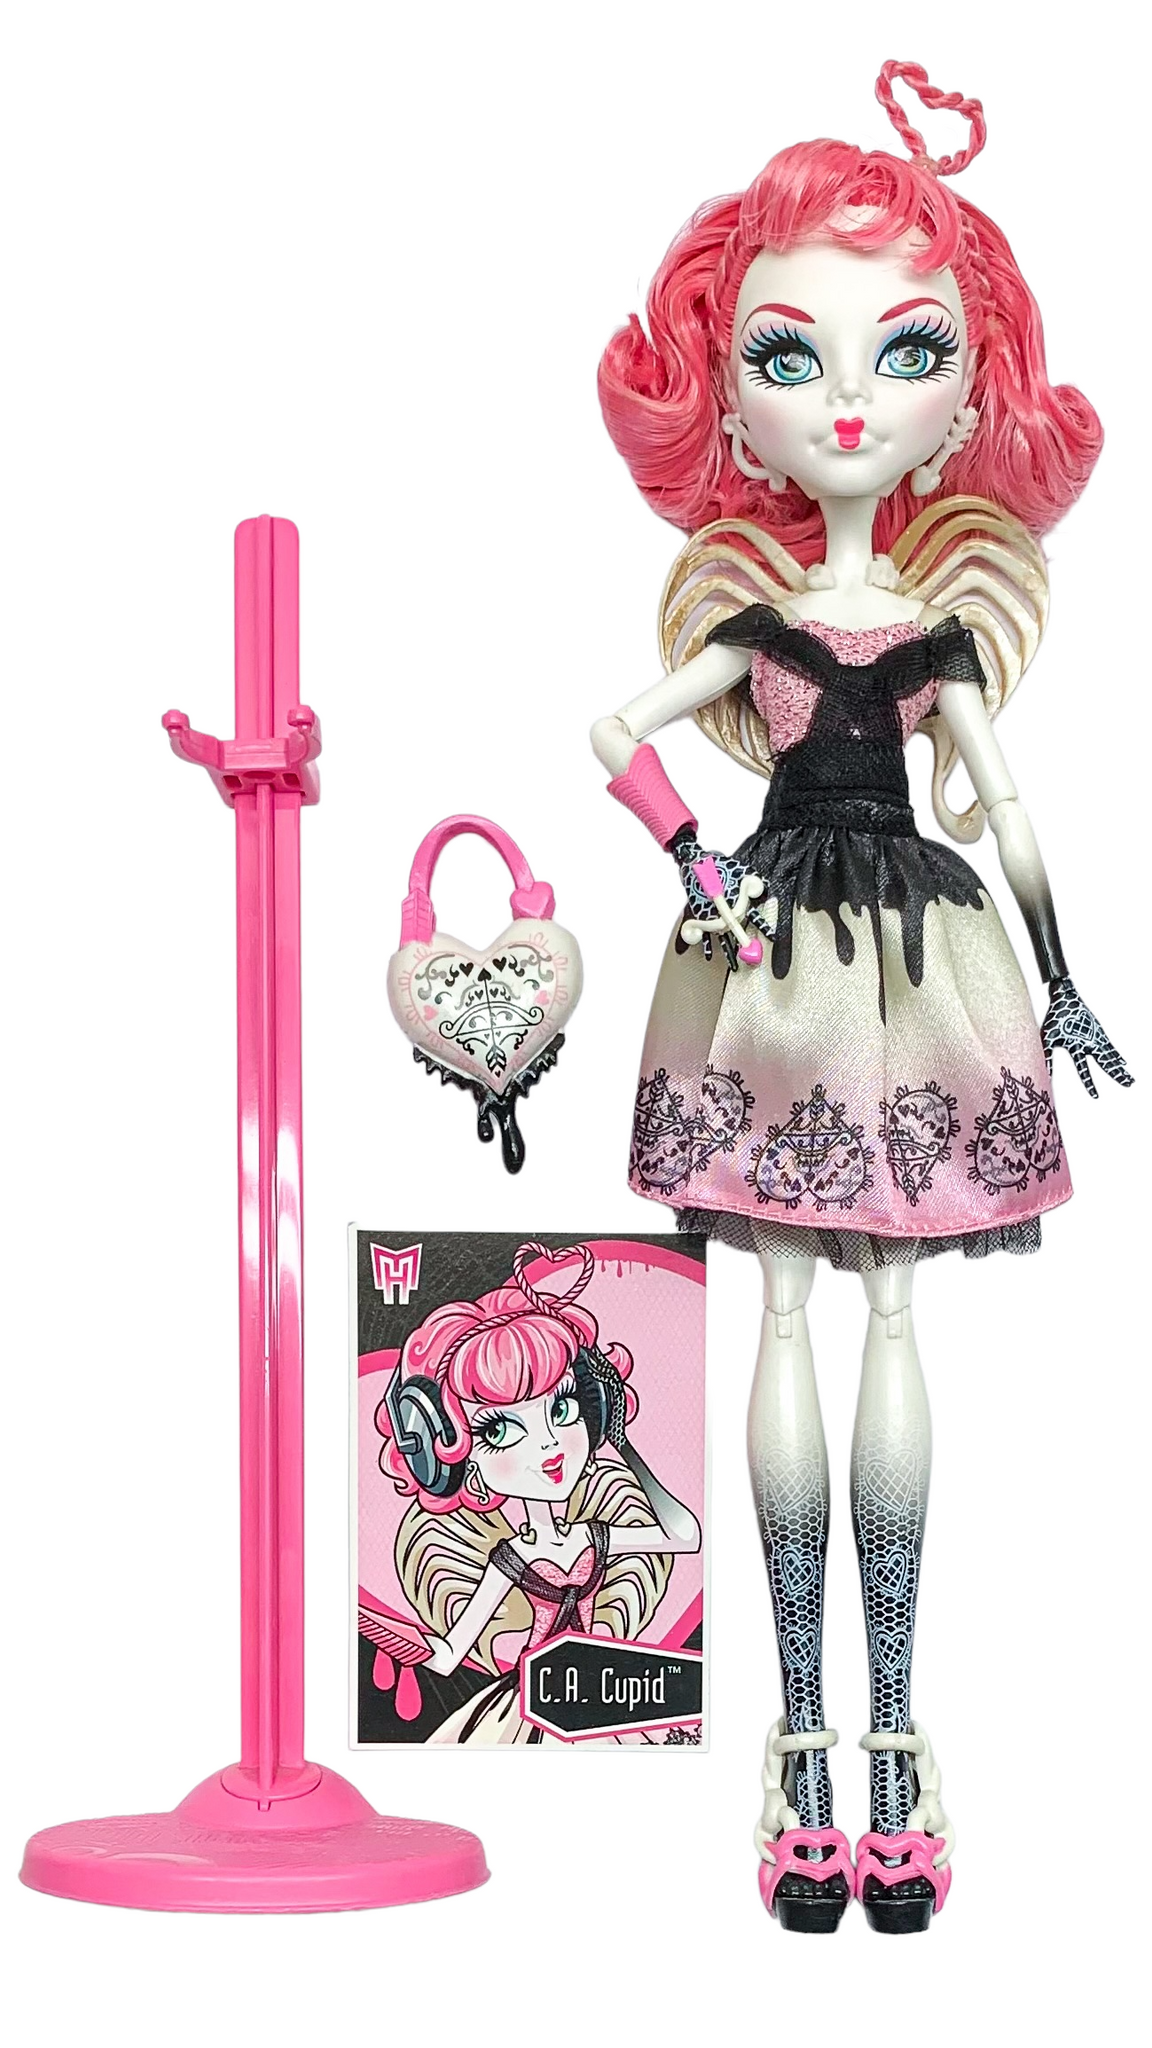 C. A. Cupid: Monster High vs. Ever After High  New monster high dolls,  Monster high dolls, Ever after high